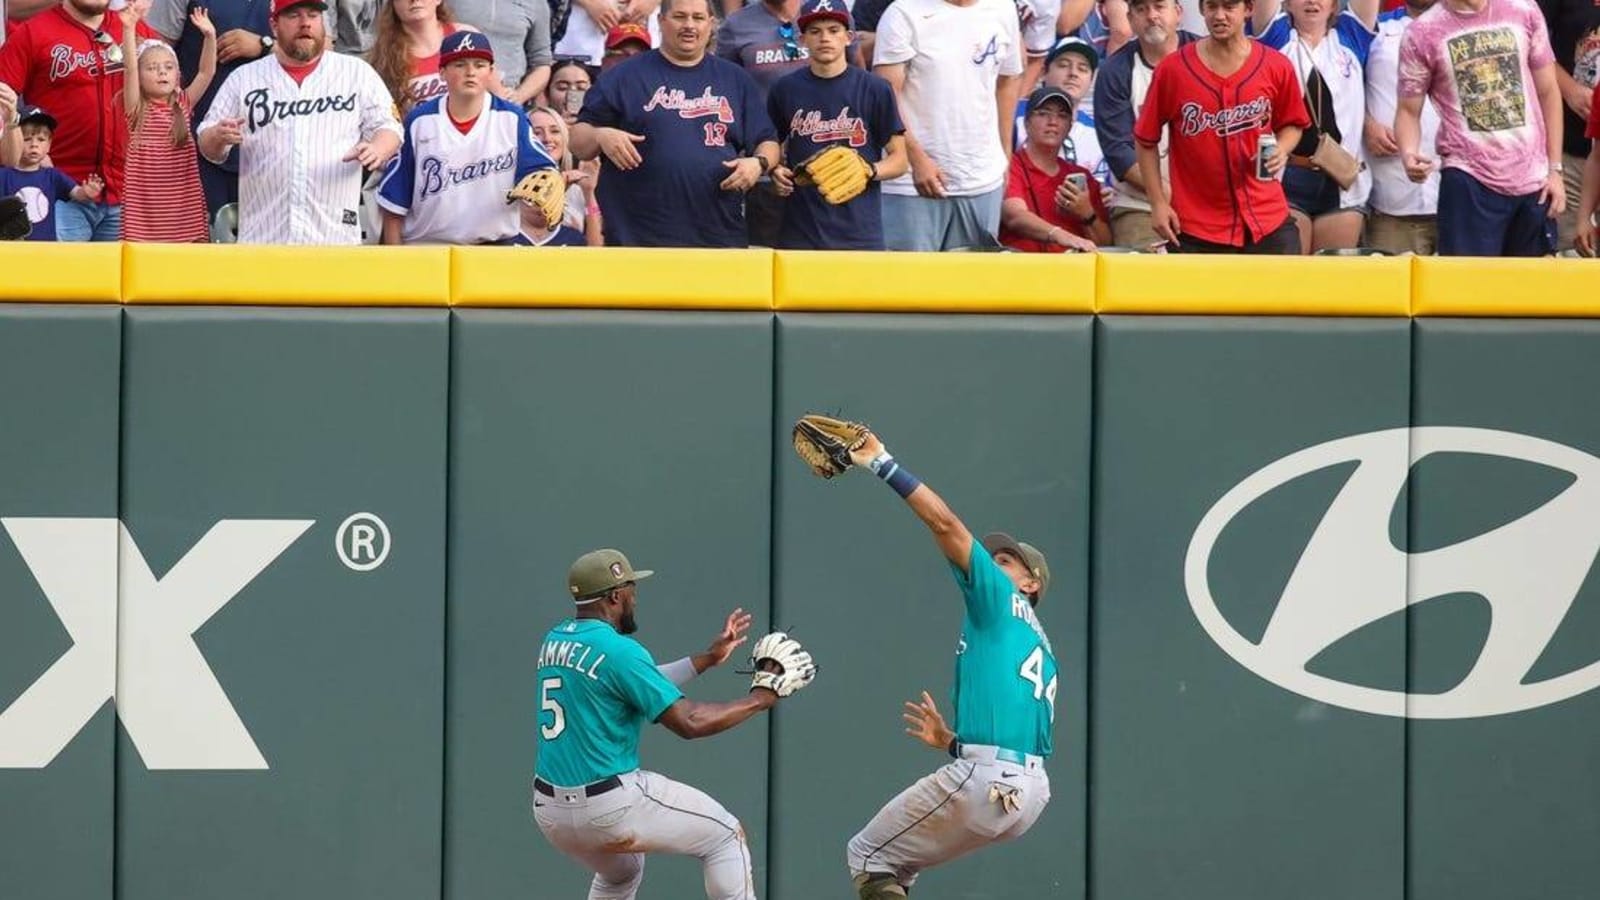 Mariners snap skid with 7-3 win over Braves